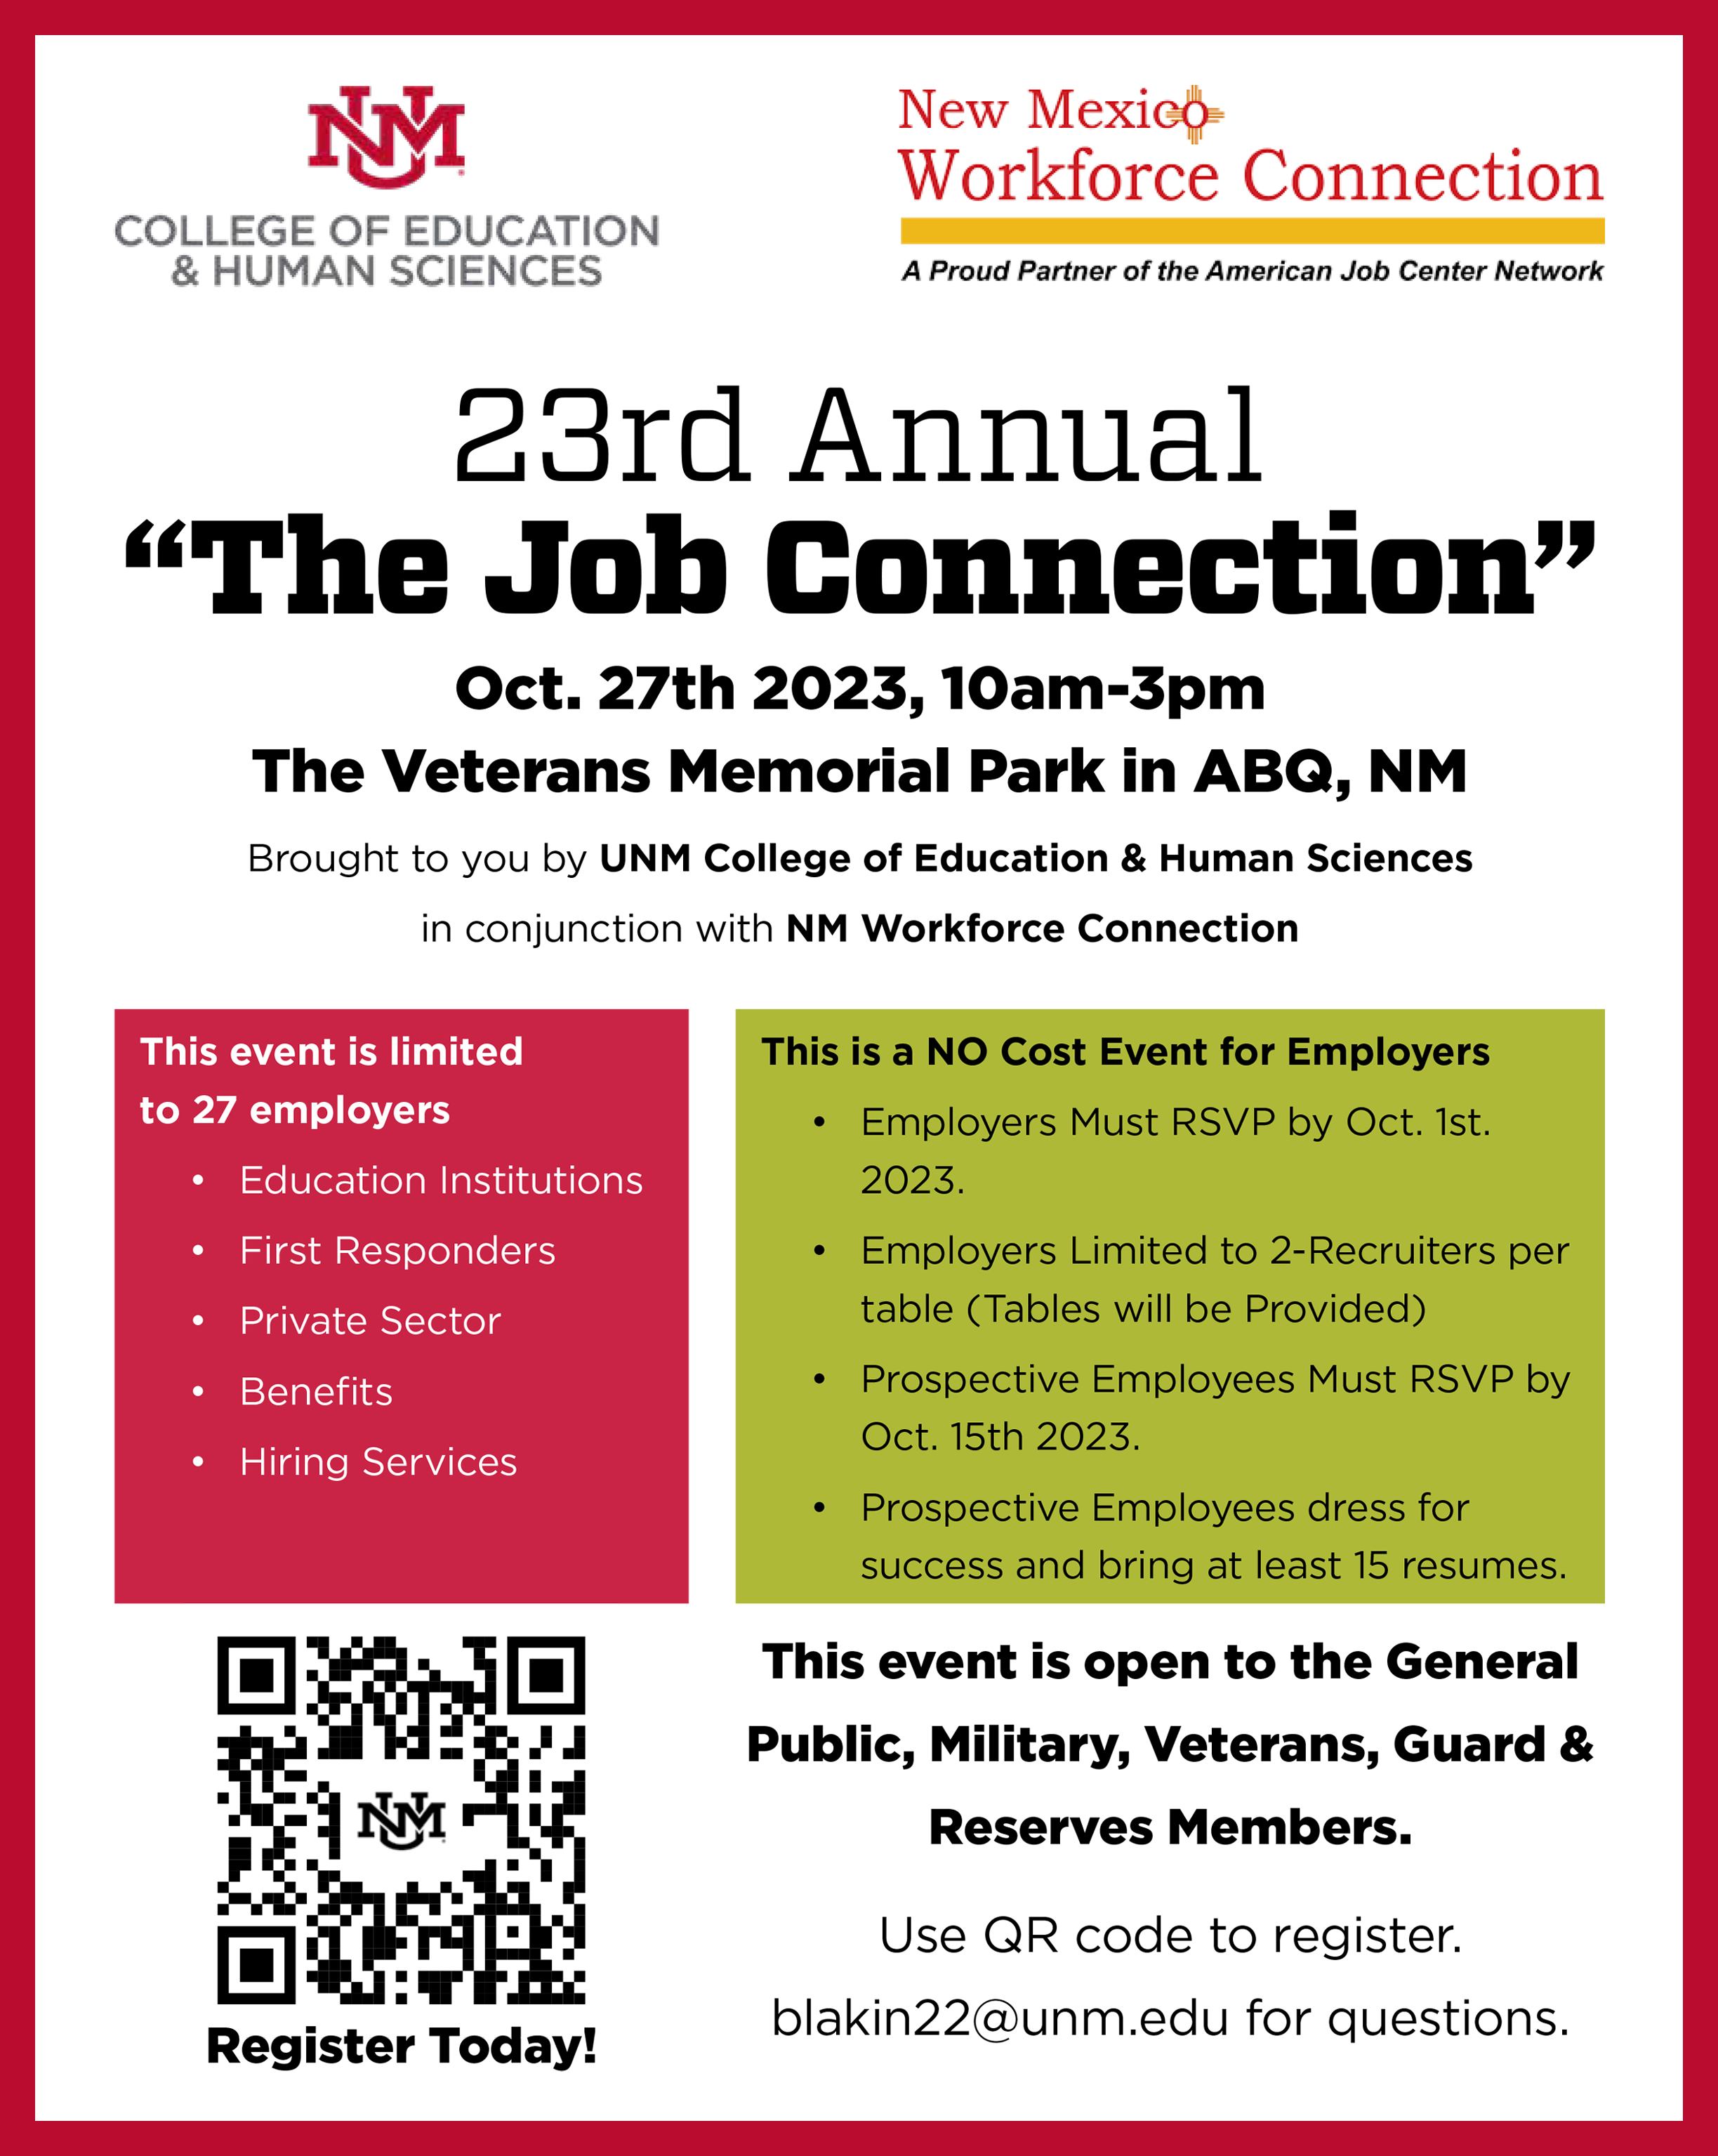 23rd Annual The Job Connection flyer